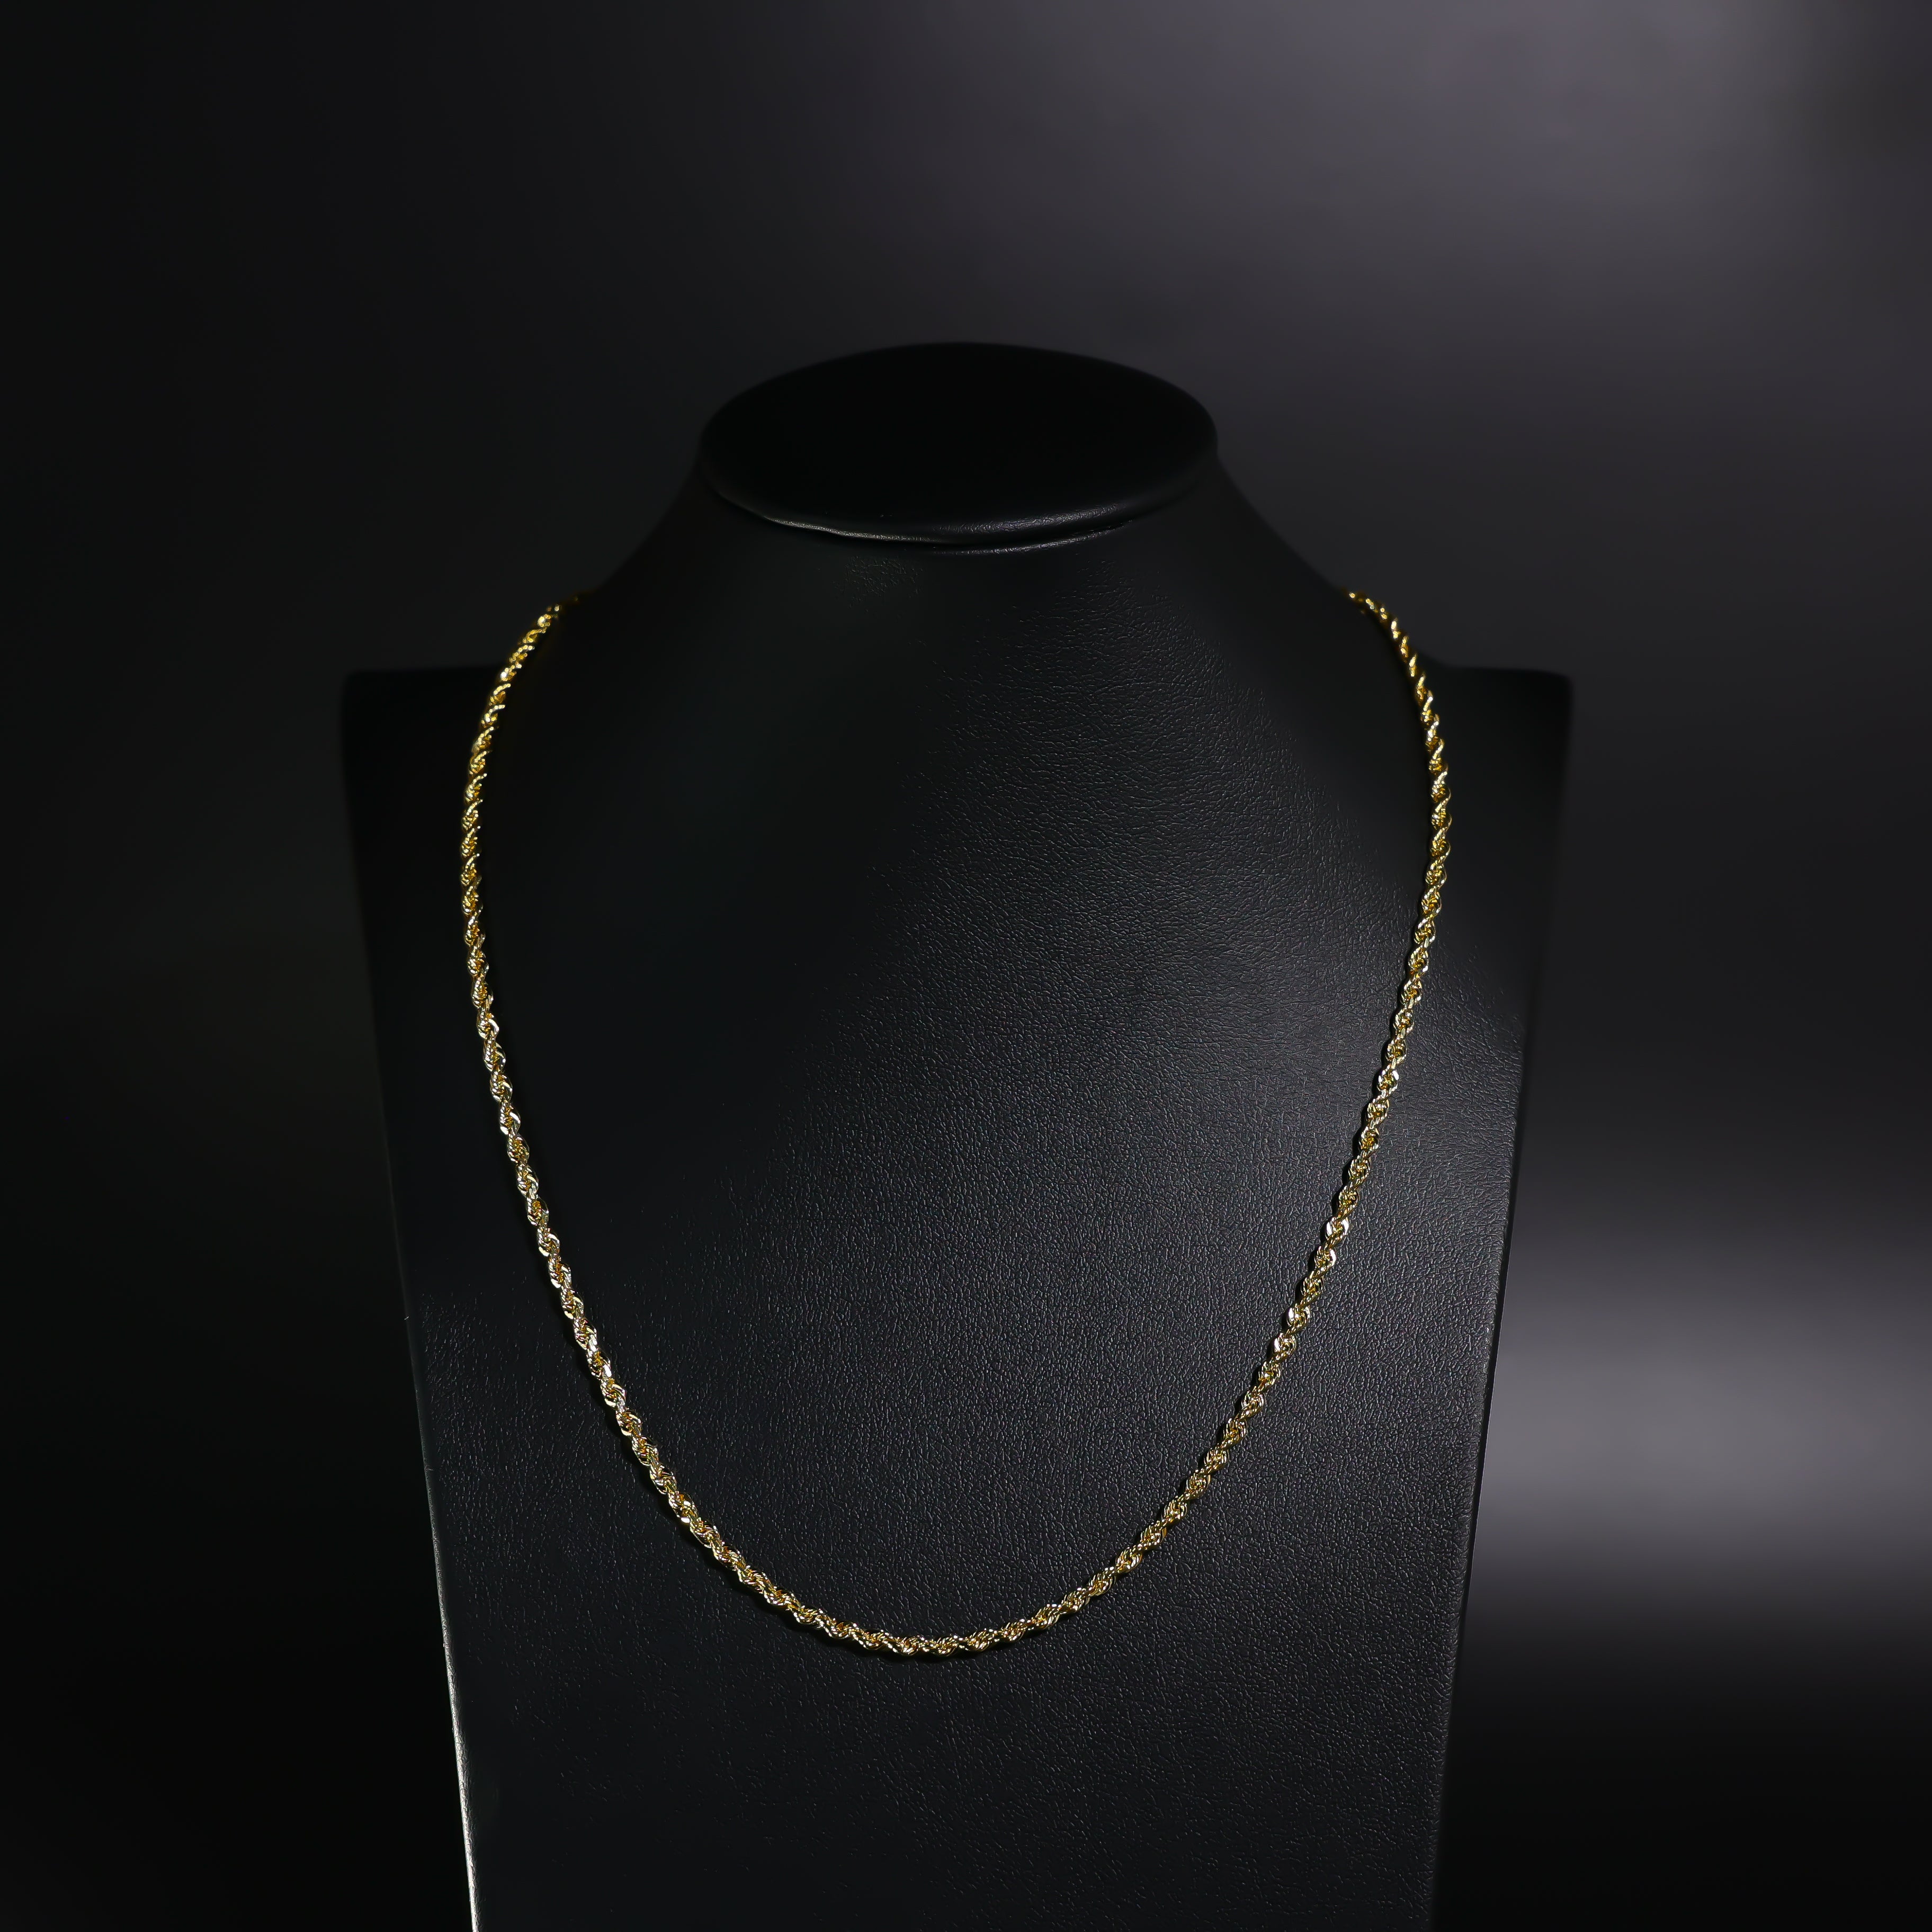 Gold Diamond Cut 3mm Solid Rope Chain Model-0387 - Charlie & Co. Jewelry